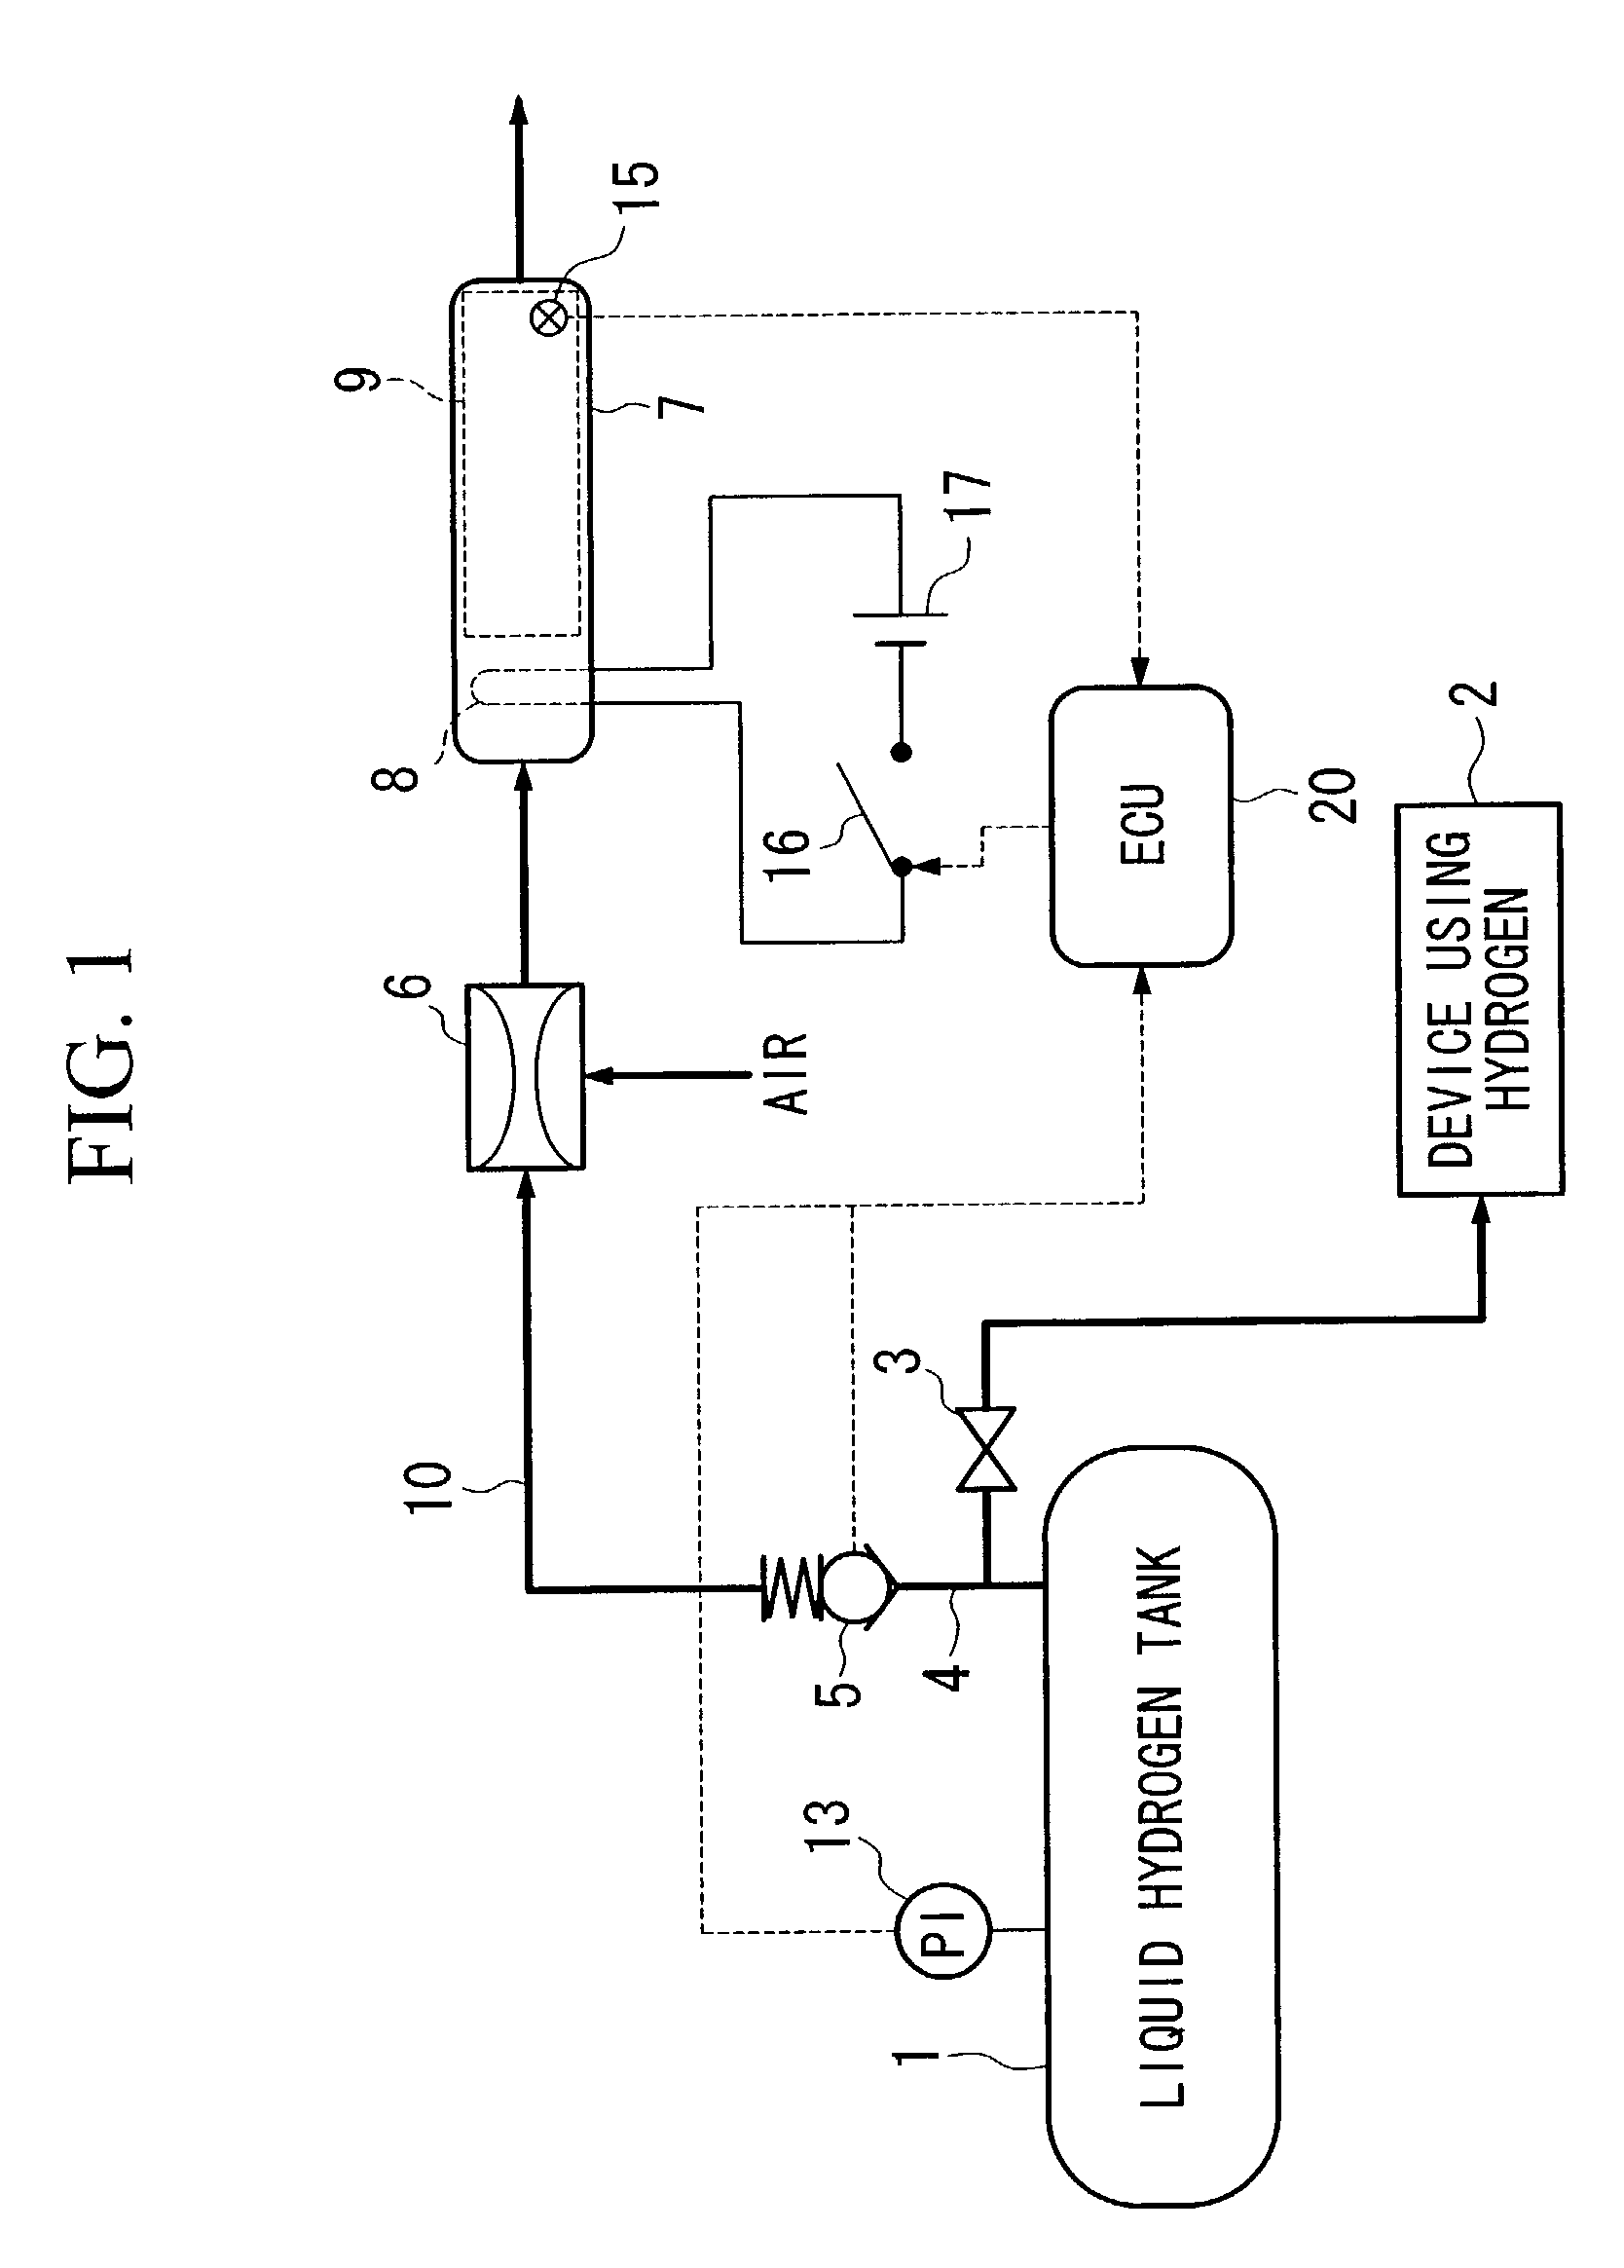 Boil-off gas processing system using electric heater